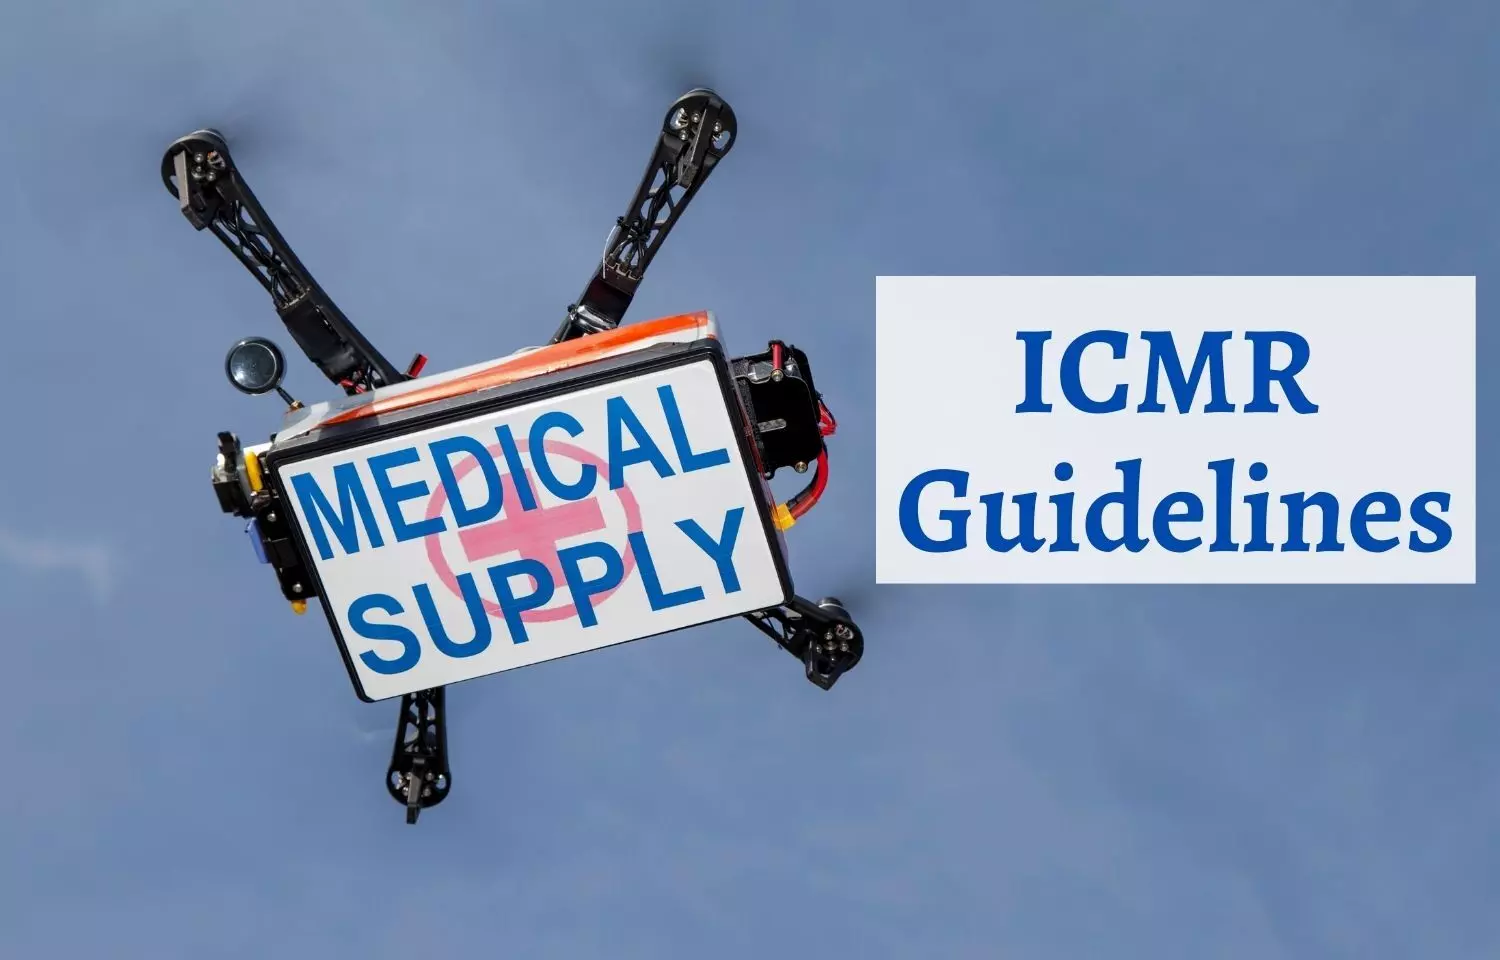 ICMR releases guidelines for drone use in healthcare